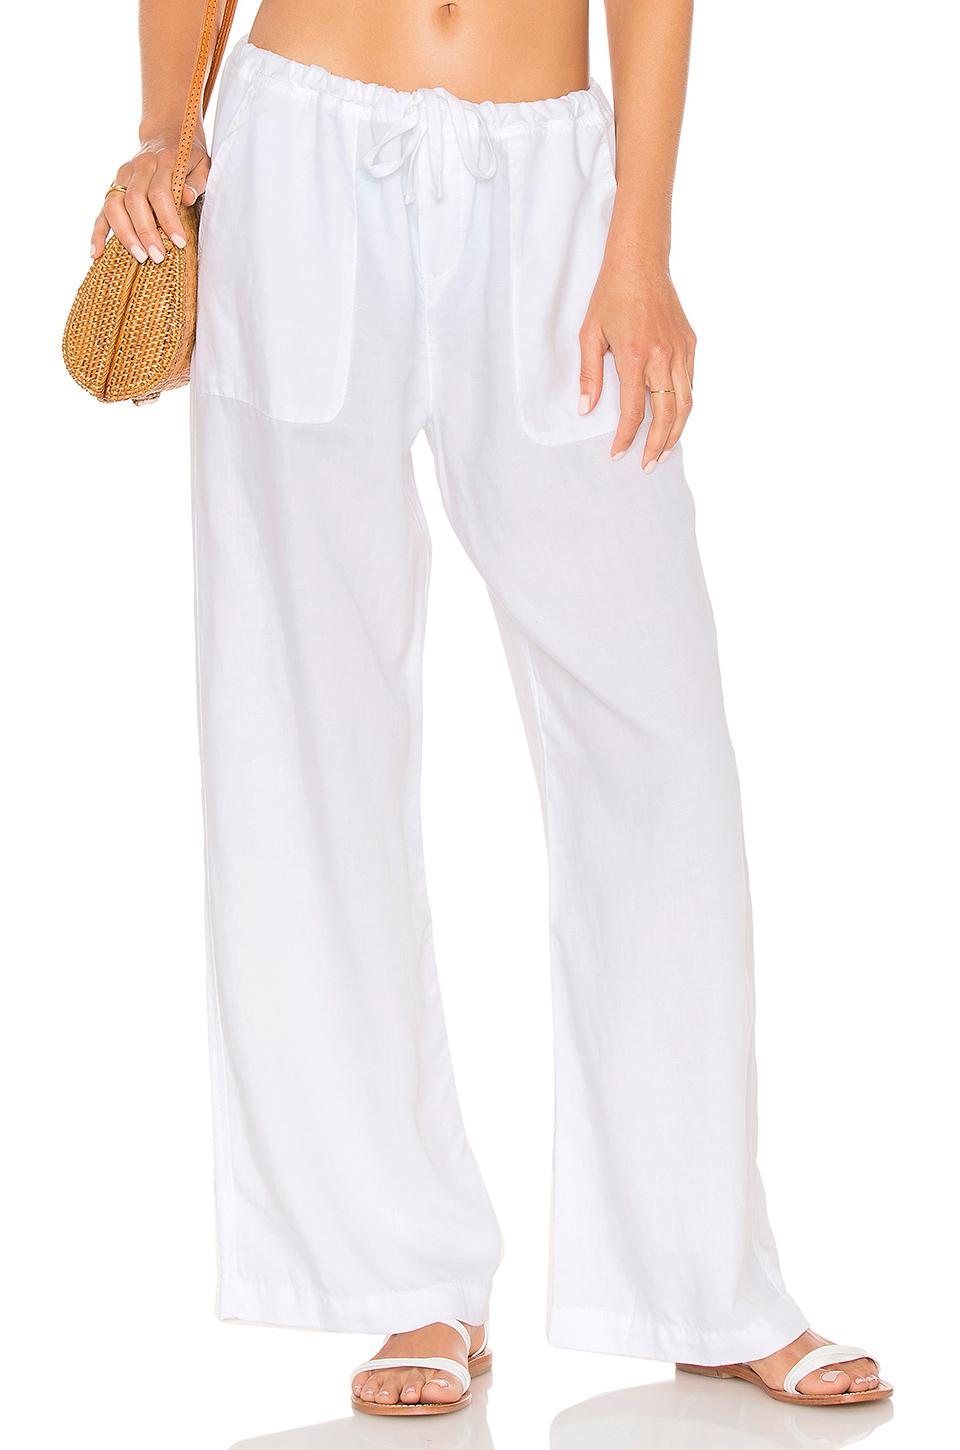 Seafolly Linen Wide Leg Beach Pant in White - Lyst